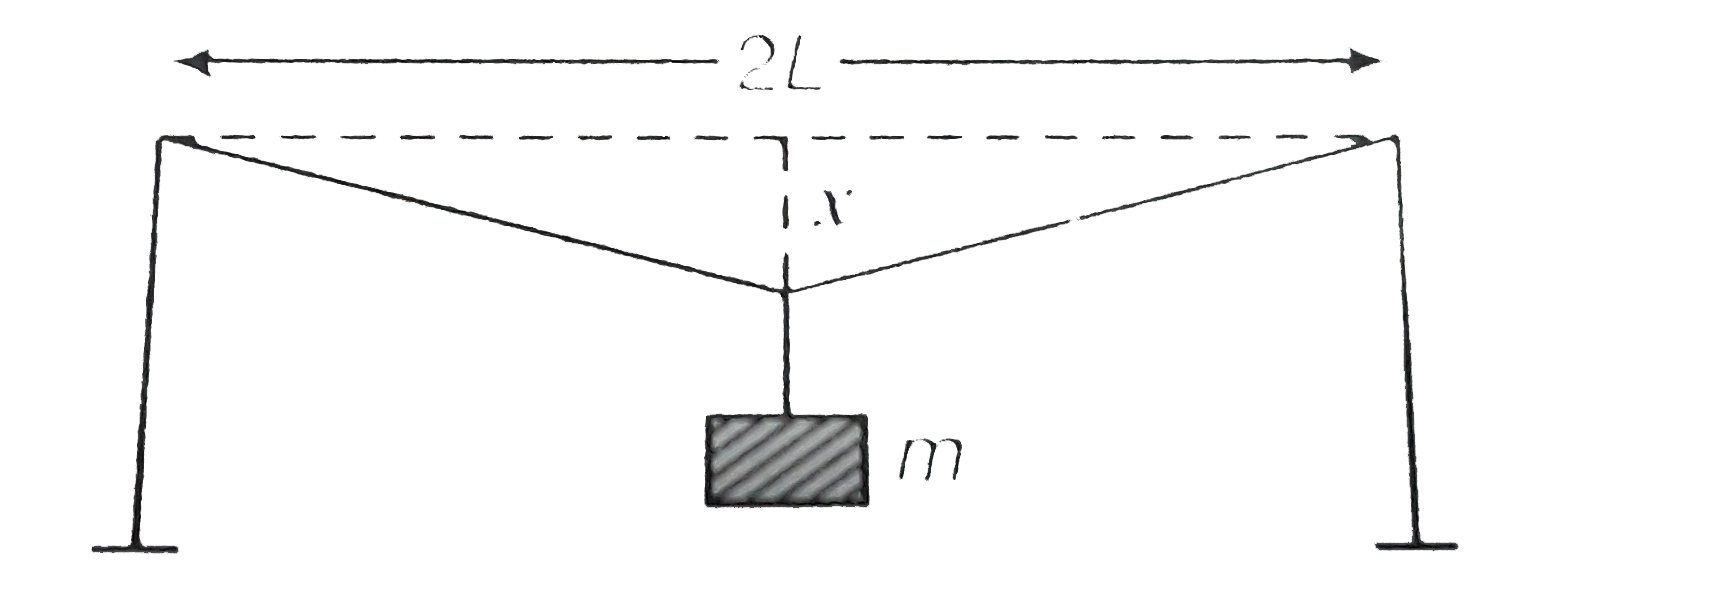 A mild steel wire of length 2L and cross-sectional area A is stretched, well within elastic limit, horizontally between two pillars (figure). A mass m is suspended from the mid-point of the wire. Strain in the wire is